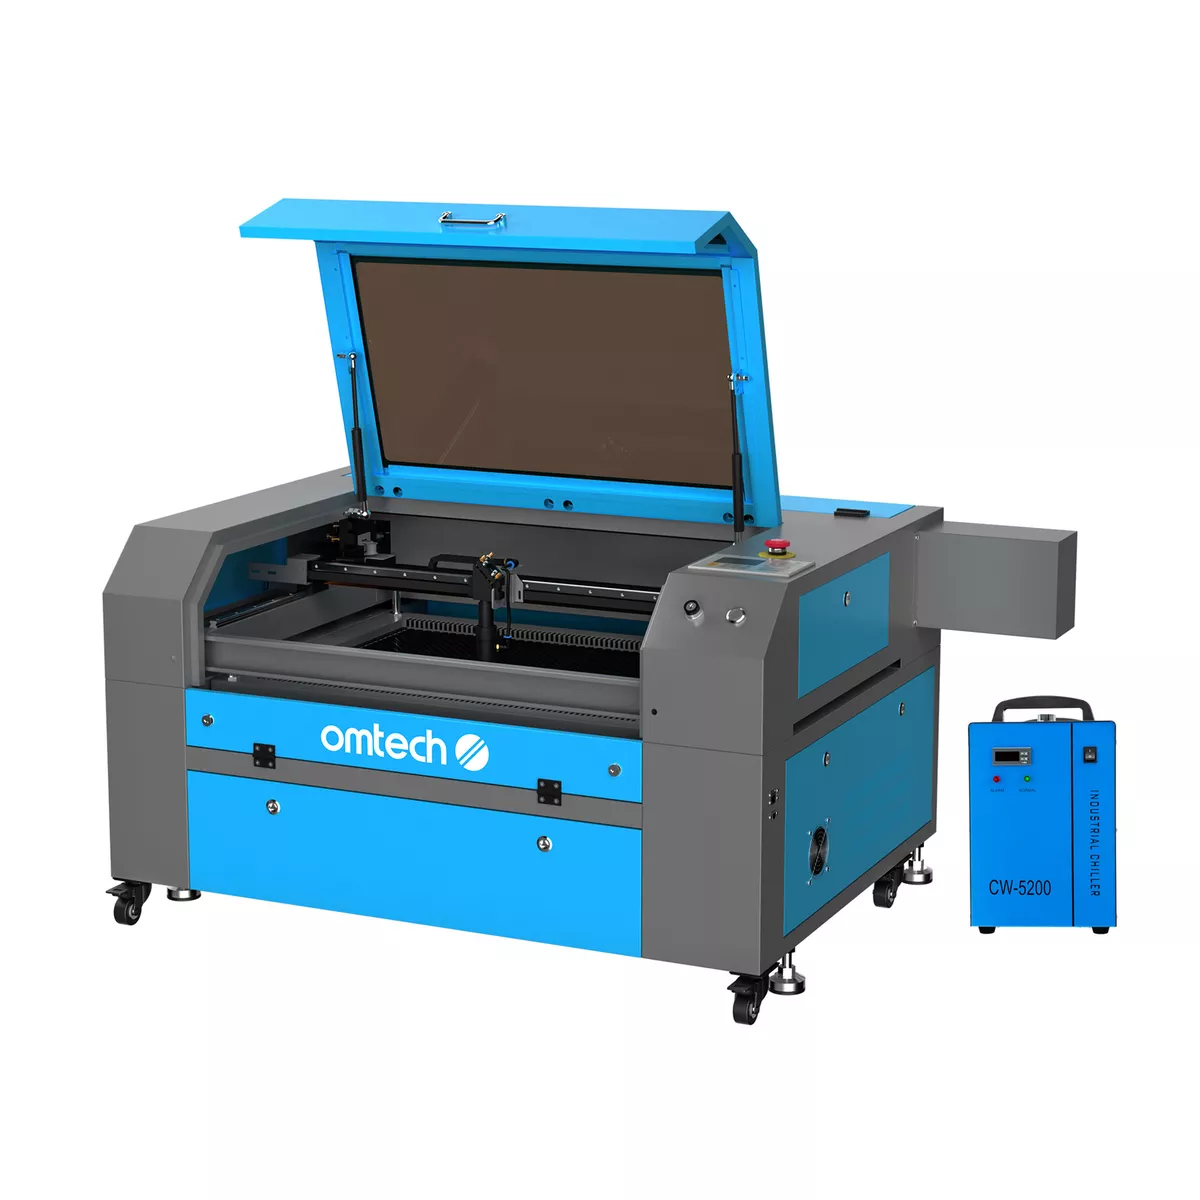 OMTech 80W 20 x 28 Inch CO2 Laser Engraver Engraving Cutter w/5200